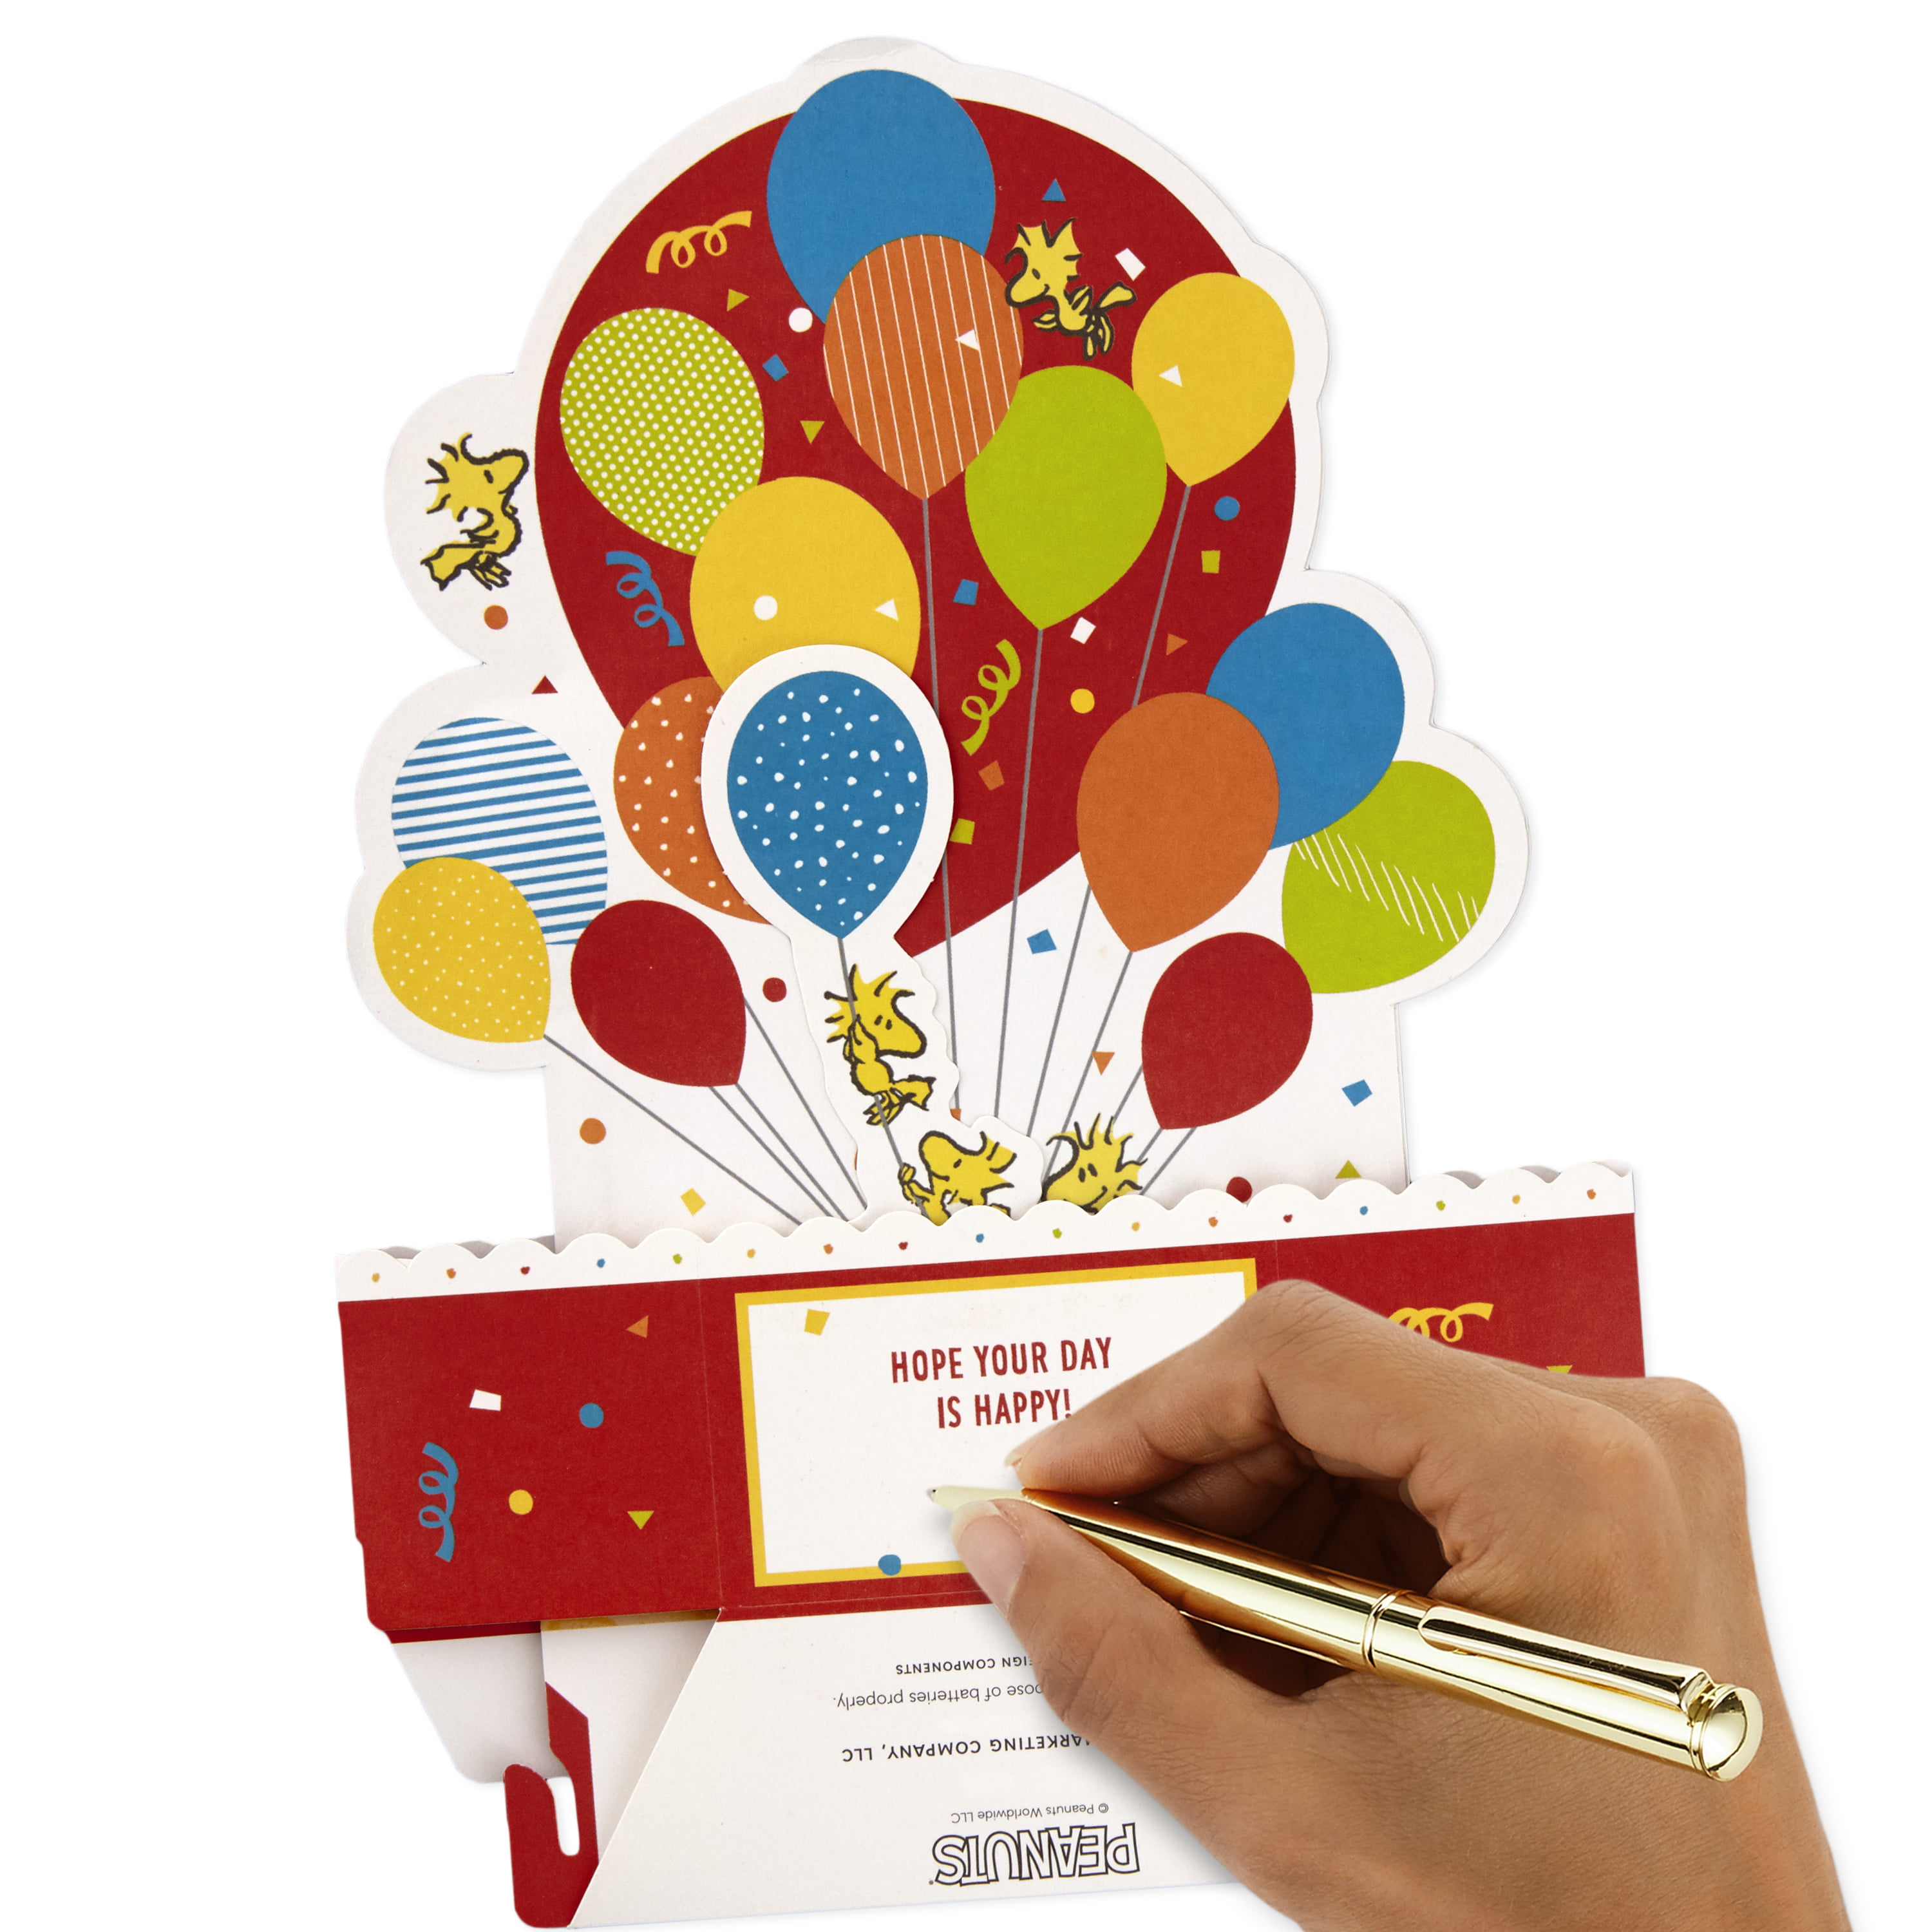 Details about   SNOOPY FLORIDA GATORS BIRTHDAY GREETING CARD 